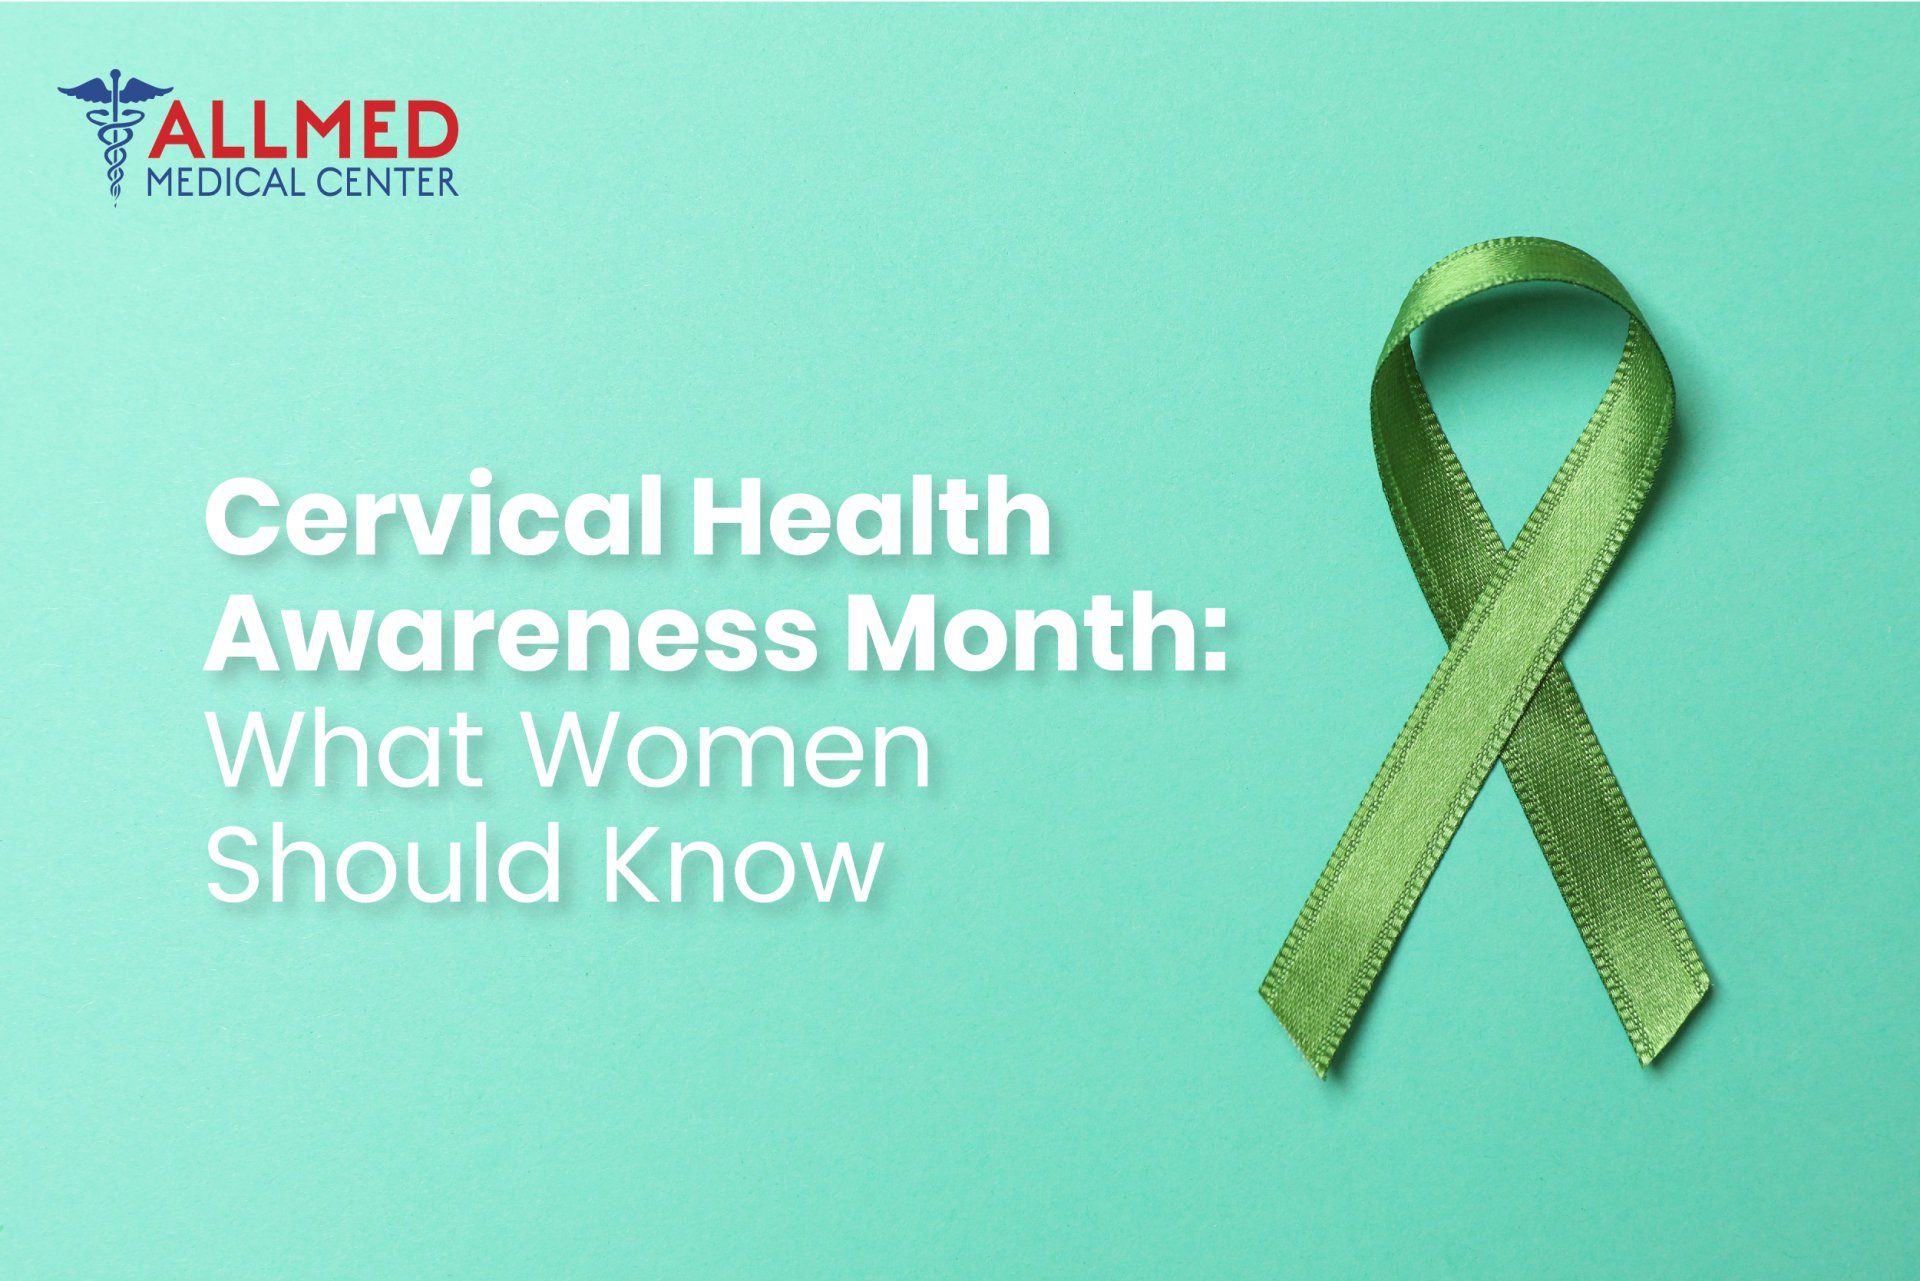 Cervical Health Awareness Month: What Women Should Know